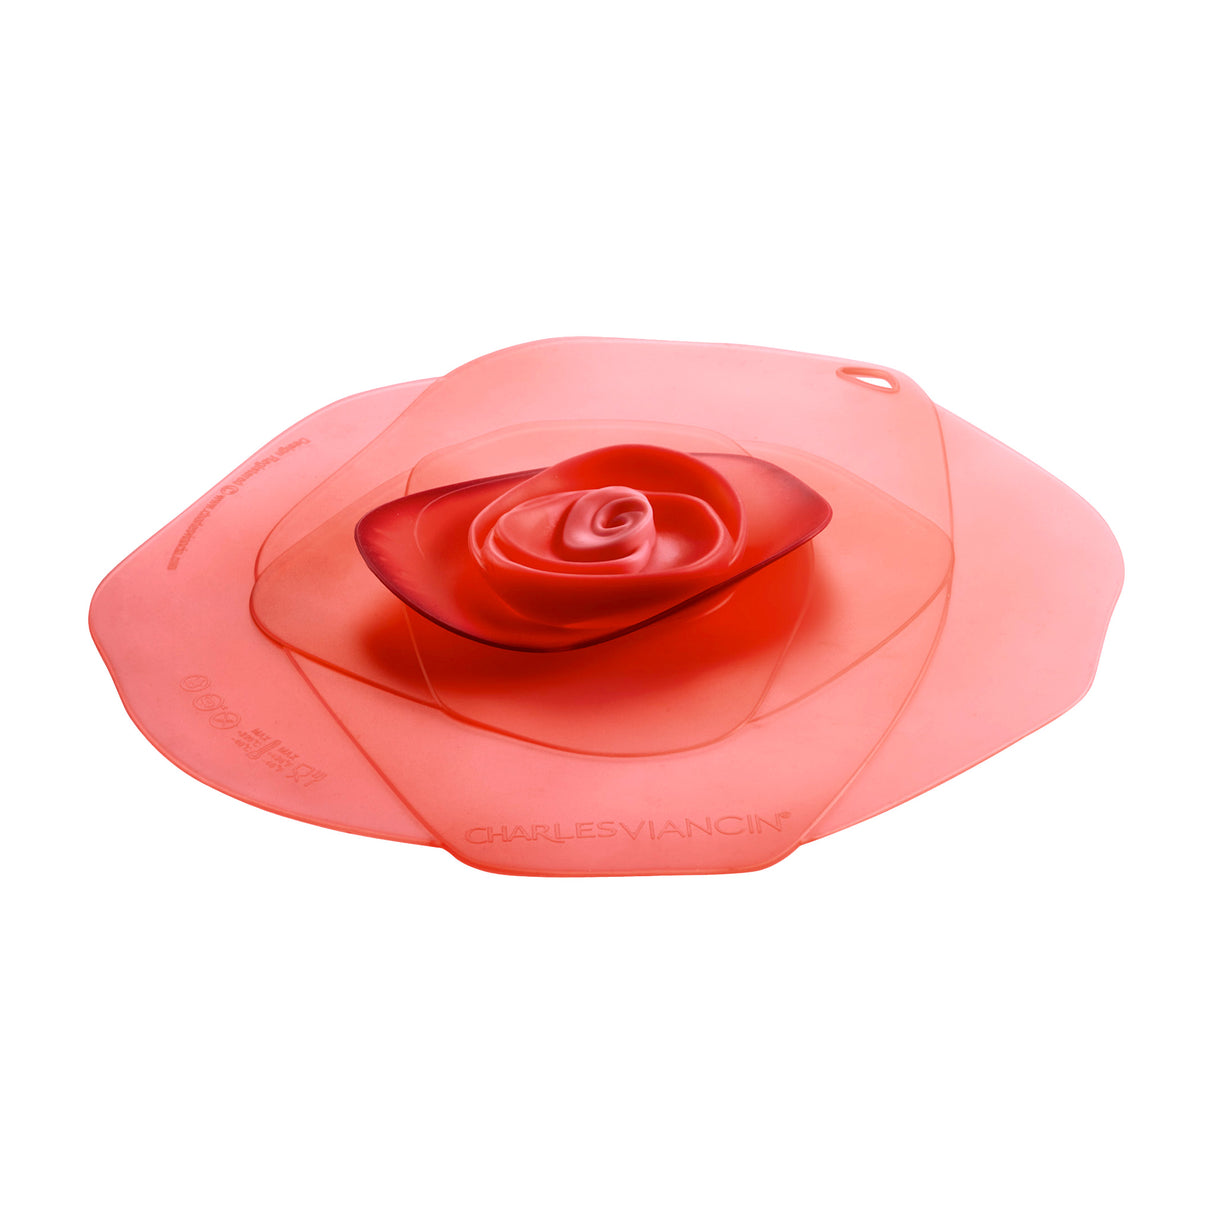 CHARLES-VIANCIN-1501-ROSE-LID-11-CANDY-PINK-SILICONE-3-4.jpg